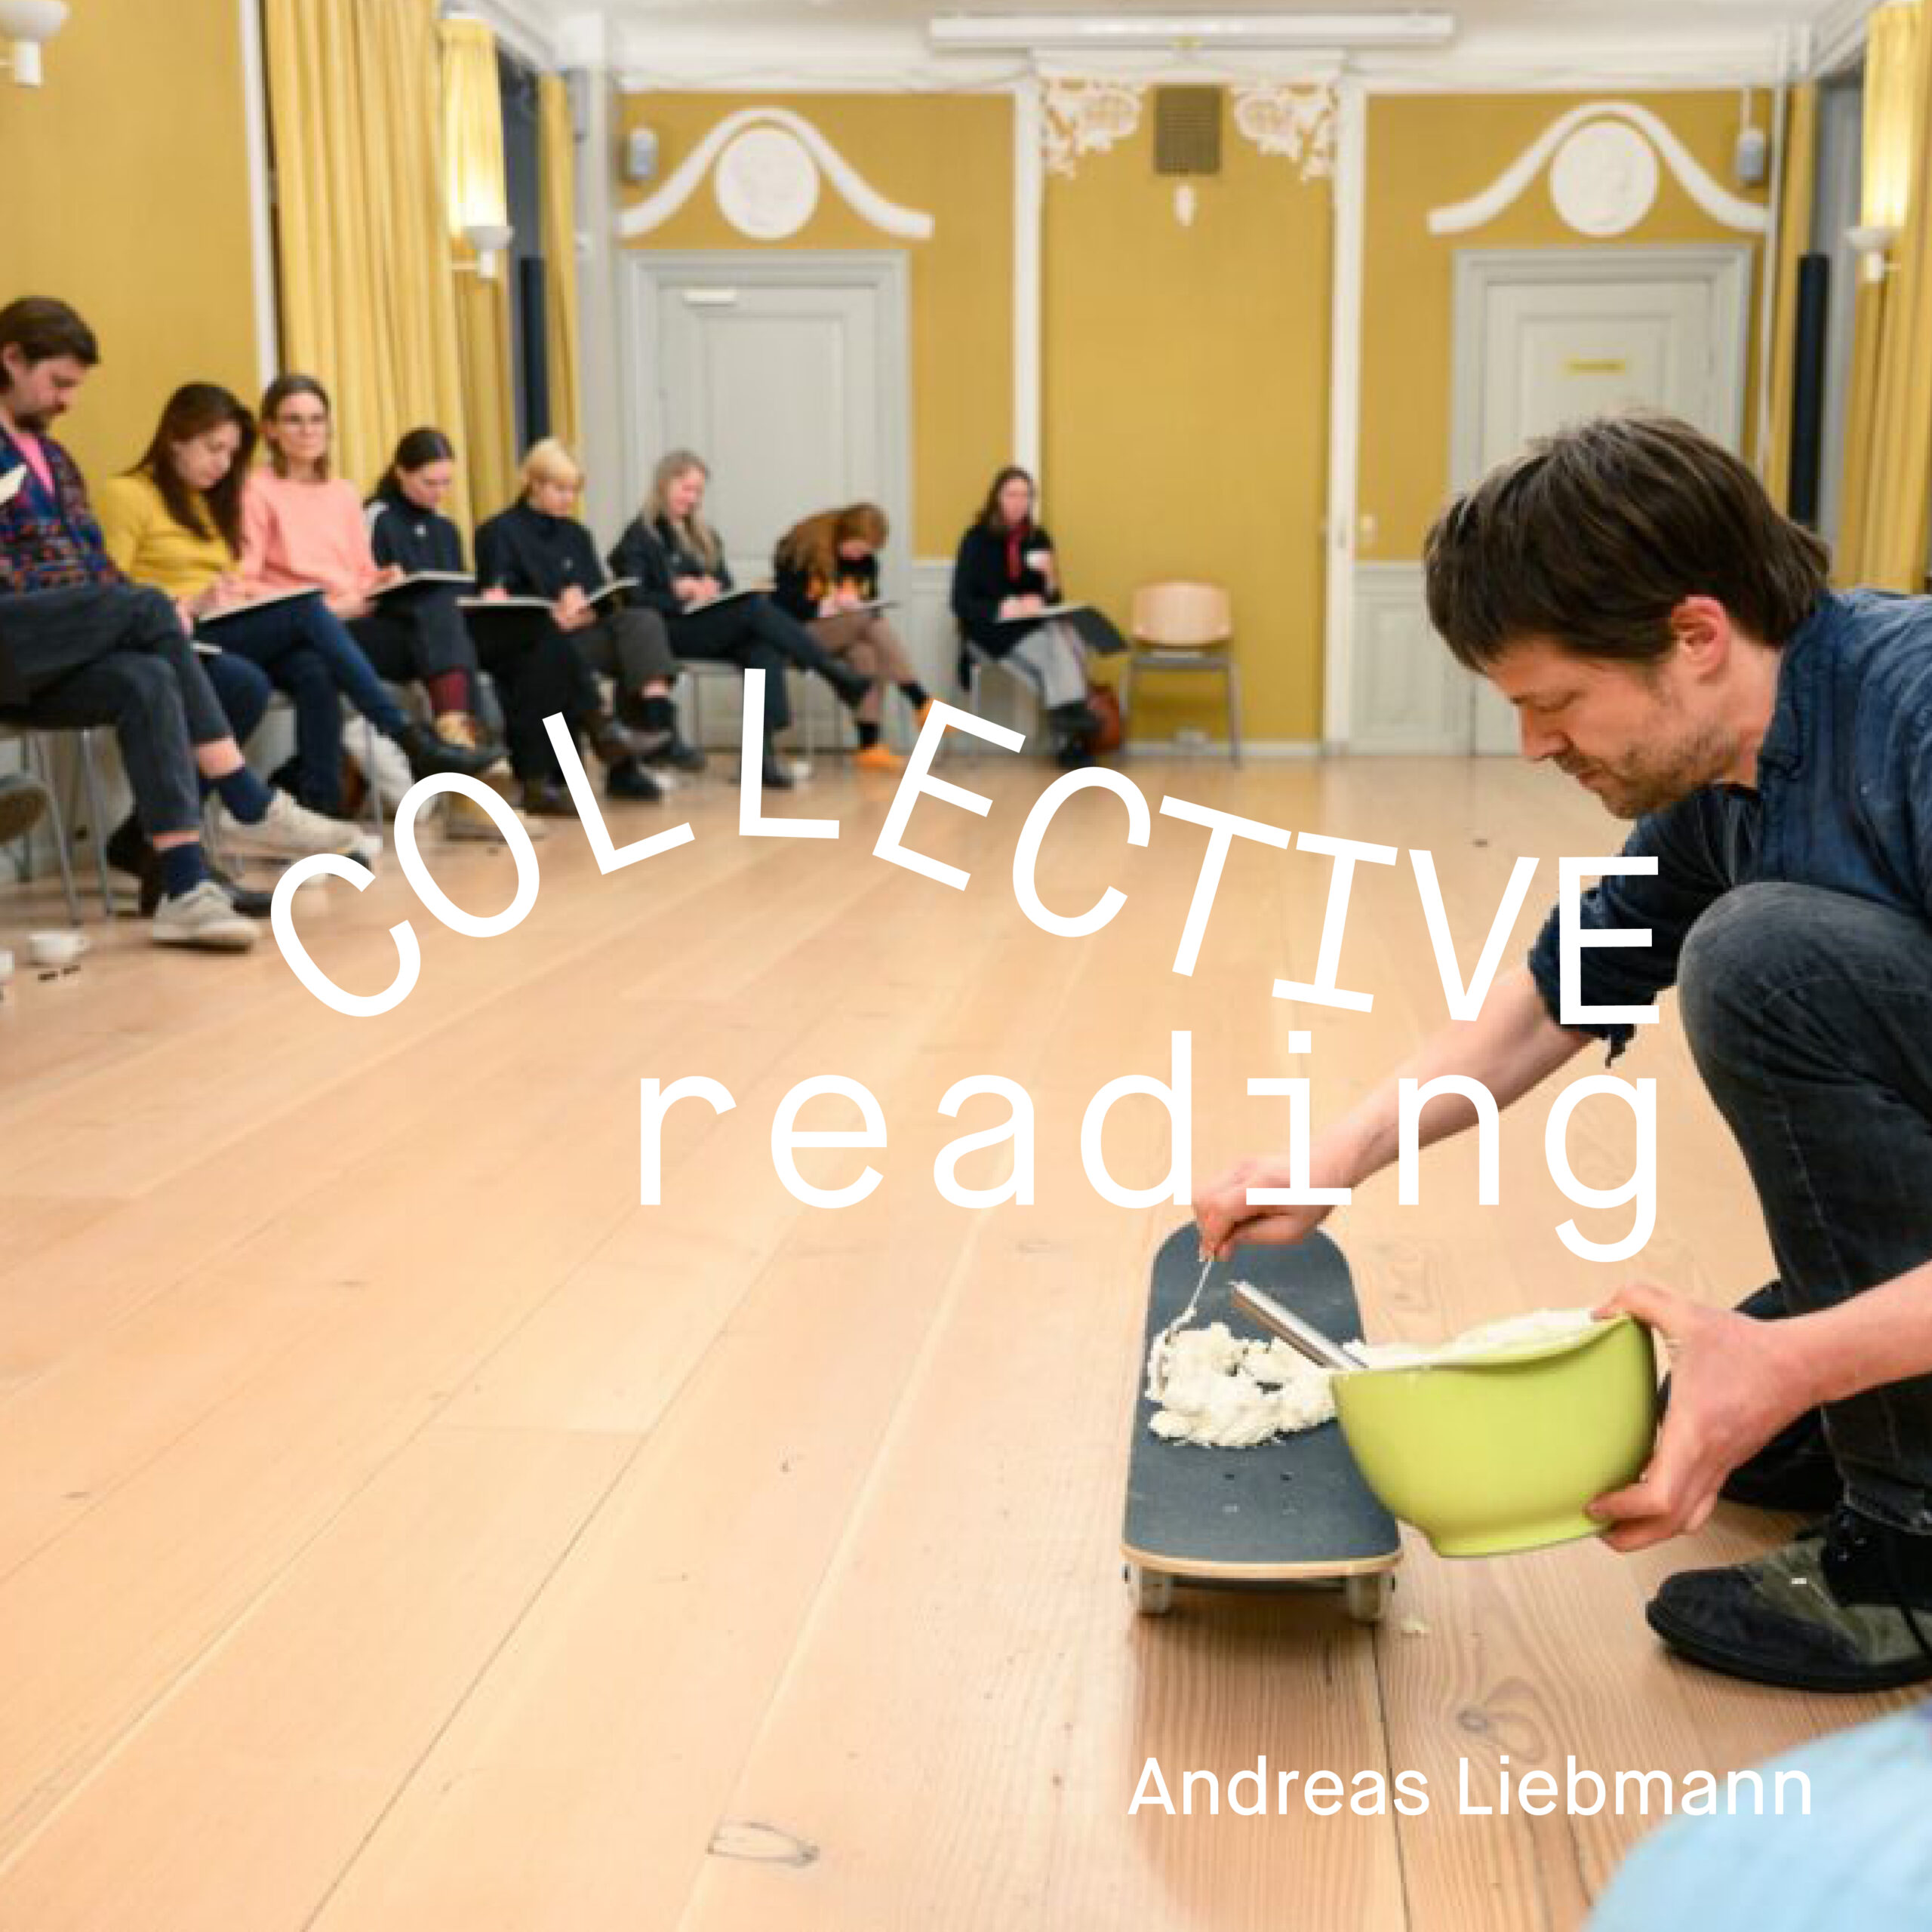 SoMe-square_collective reading-Andreas Liebmann